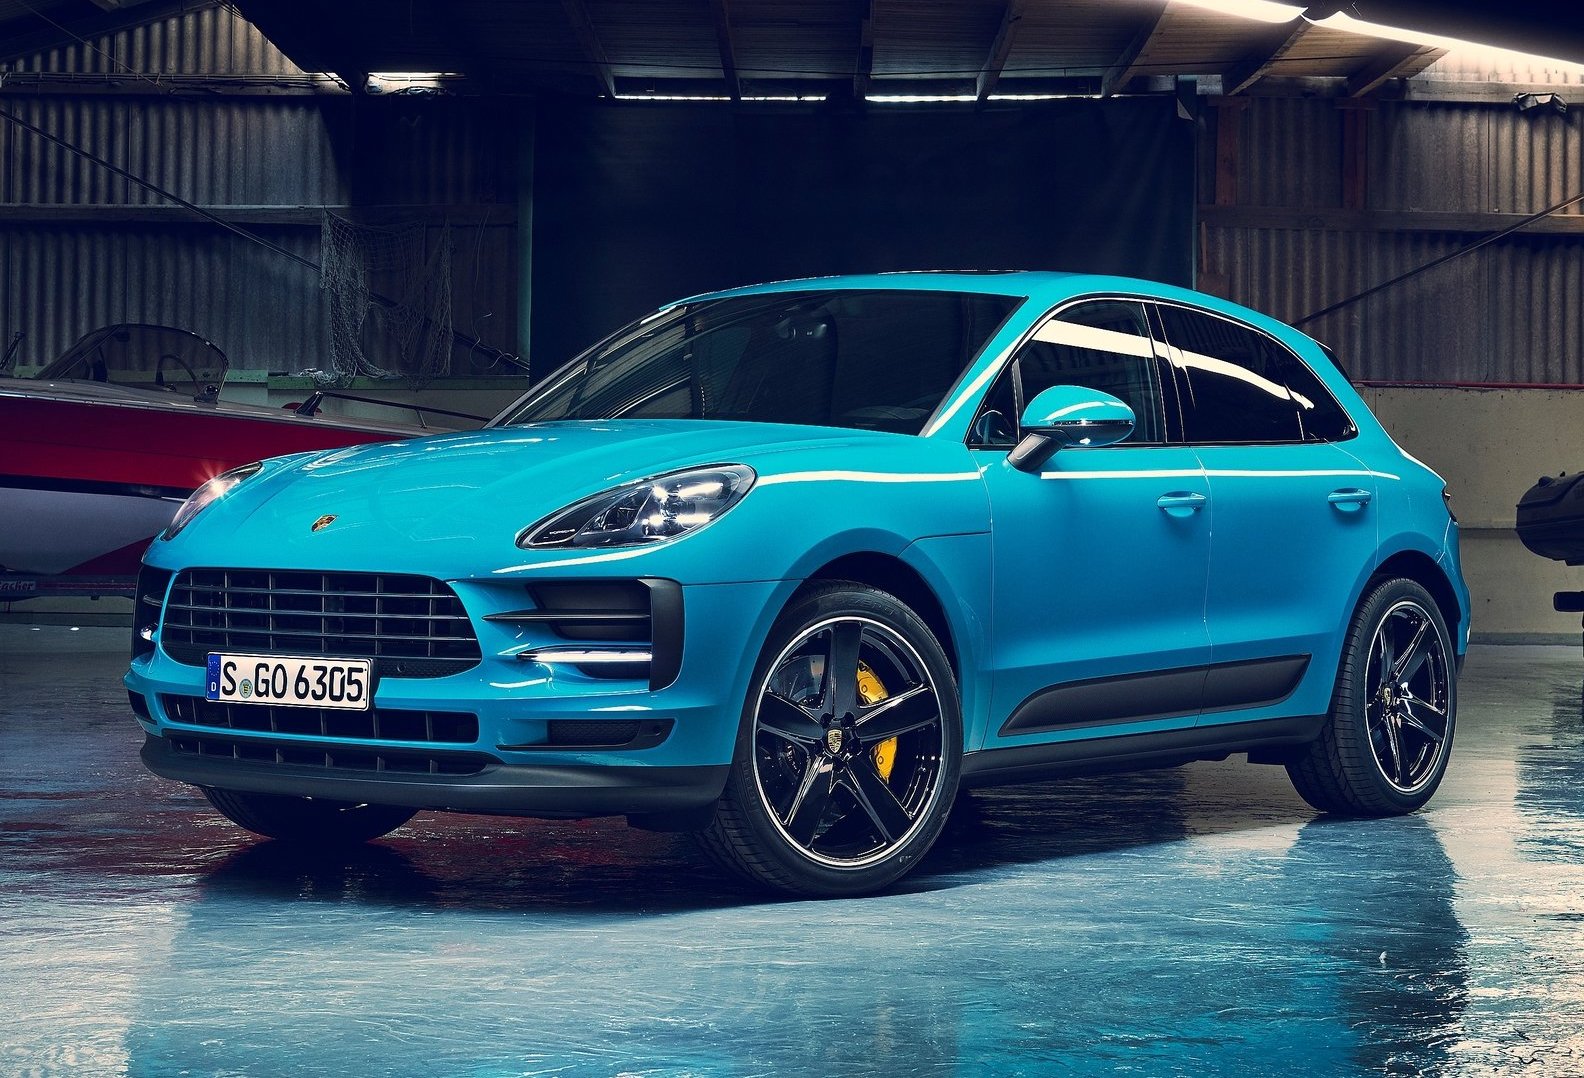 2019 Porsche Macan unveiled with updated tech – PerformanceDrive